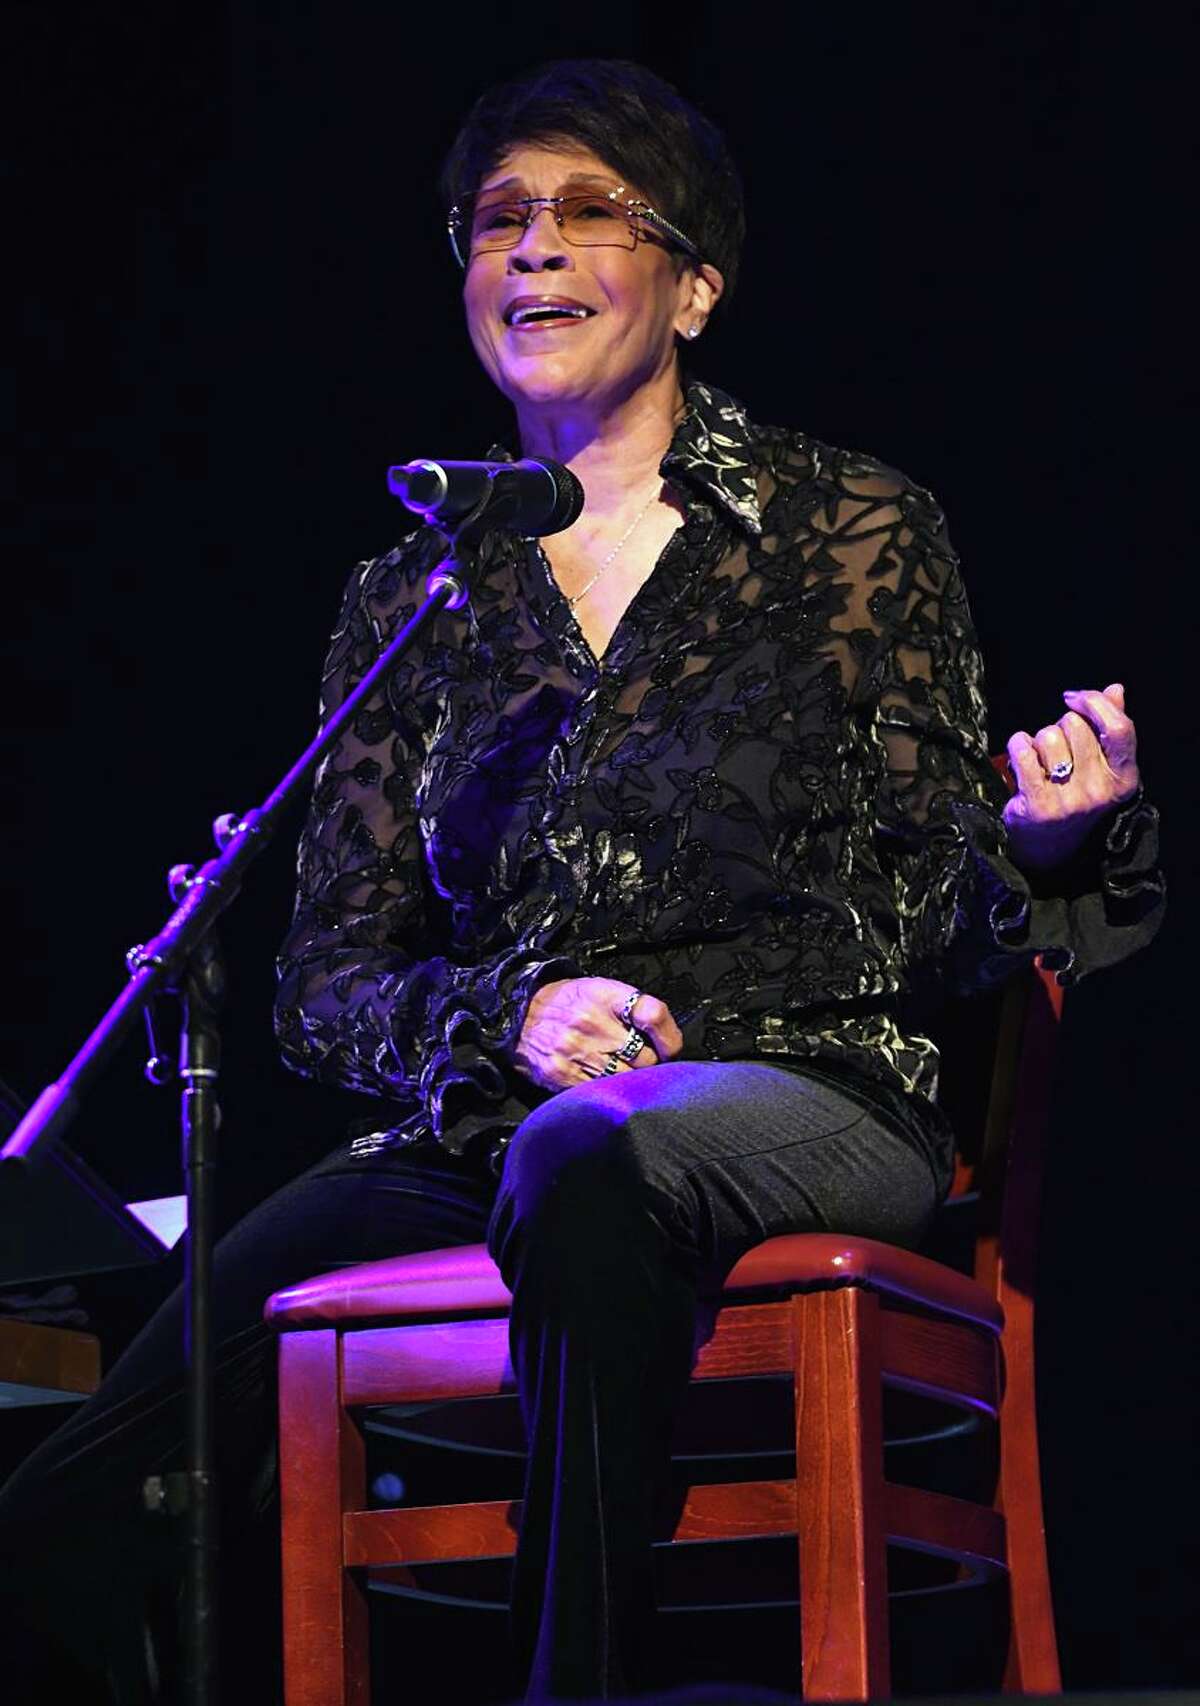 Singer and songwriter Bettye Lavette, 76, is shown performing on stage during her live concert appearance Jan. 30 at Infinity Hall in Hartford. Bettye LaVette, born Betty Jo Haskins made her first record at 16, but achieved only intermittent fame until 2005, when her album ”I’ve Got My Own Hell to Raise” was released to widespread critical acclaim, and was named on many critics’ “Best of 2005” lists. Her next album,”The Scene of the Crime”, debuted at number one onBillboard’s Top Blues Albums chart and was nominated for Best Contemporary Blues Album at the 2008 Grammy Awards. Her 2018 album “Things Have Changed”, an album of all Bob Dylan songs, was nominated for Best Americana Album and the song “Don’t Fall Apart On Me Tonight” was nominated for Best Traditional R&BPerformane. In May 2020, Lavette garnered another Blues Music Award in the “Soul Blues Female Artist of the Year” category. That same year, LaVette was inducted into the Blues Hall of Fame. On August 28, 2020, she released a new studio album, “Blackbirds” which is an album of songs by women from the 1950s who were the “bridge she came across on”. It was nominated for Best Contemporary Blues Album. In 2021, Bettye again received the Blues Music Award for “Soul Blues Female Artist of the Year”. To learn more about Bettye you can visit www.bettyelavette.com